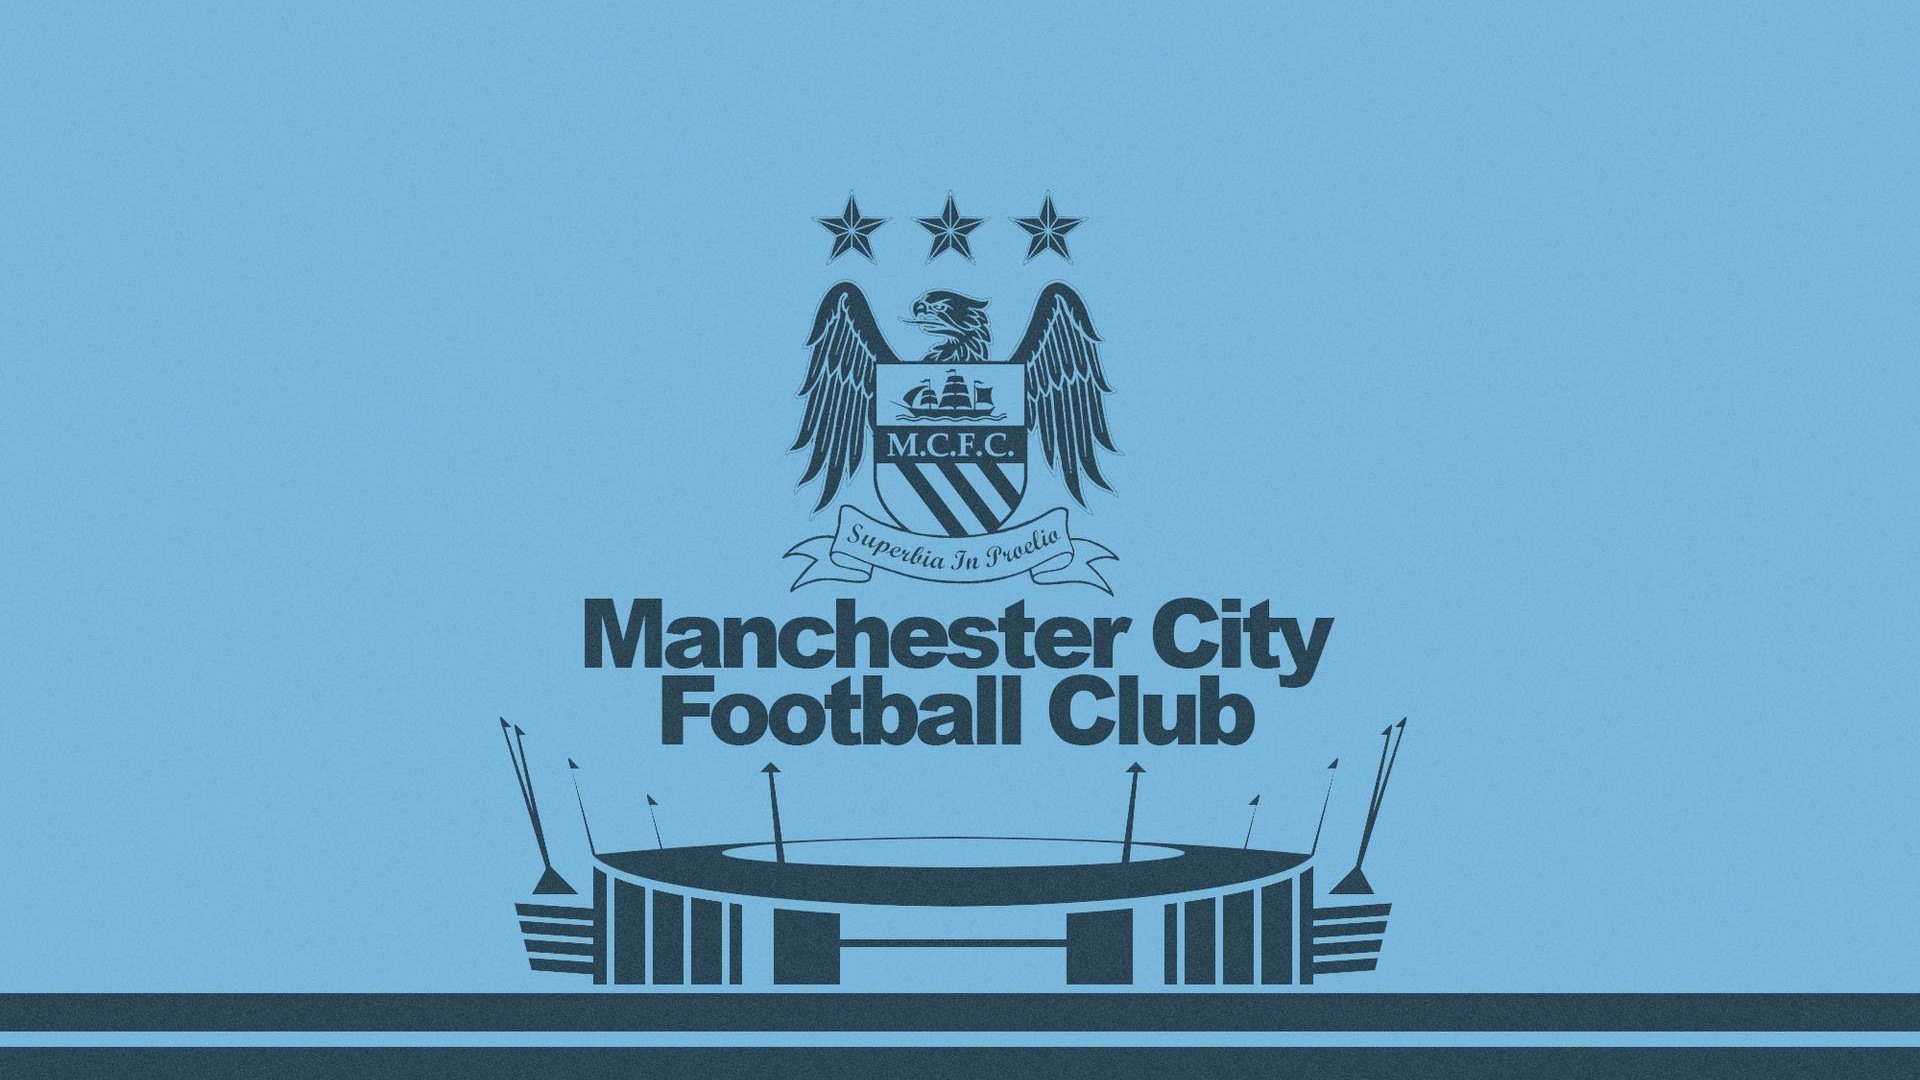 HD Desktop Wallpaper Manchester City with high-resolution 1920x1080 pixel. You can use this wallpaper for your Desktop Computers, Mac Screensavers, Windows Backgrounds, iPhone Wallpapers, Tablet or Android Lock screen and another Mobile device